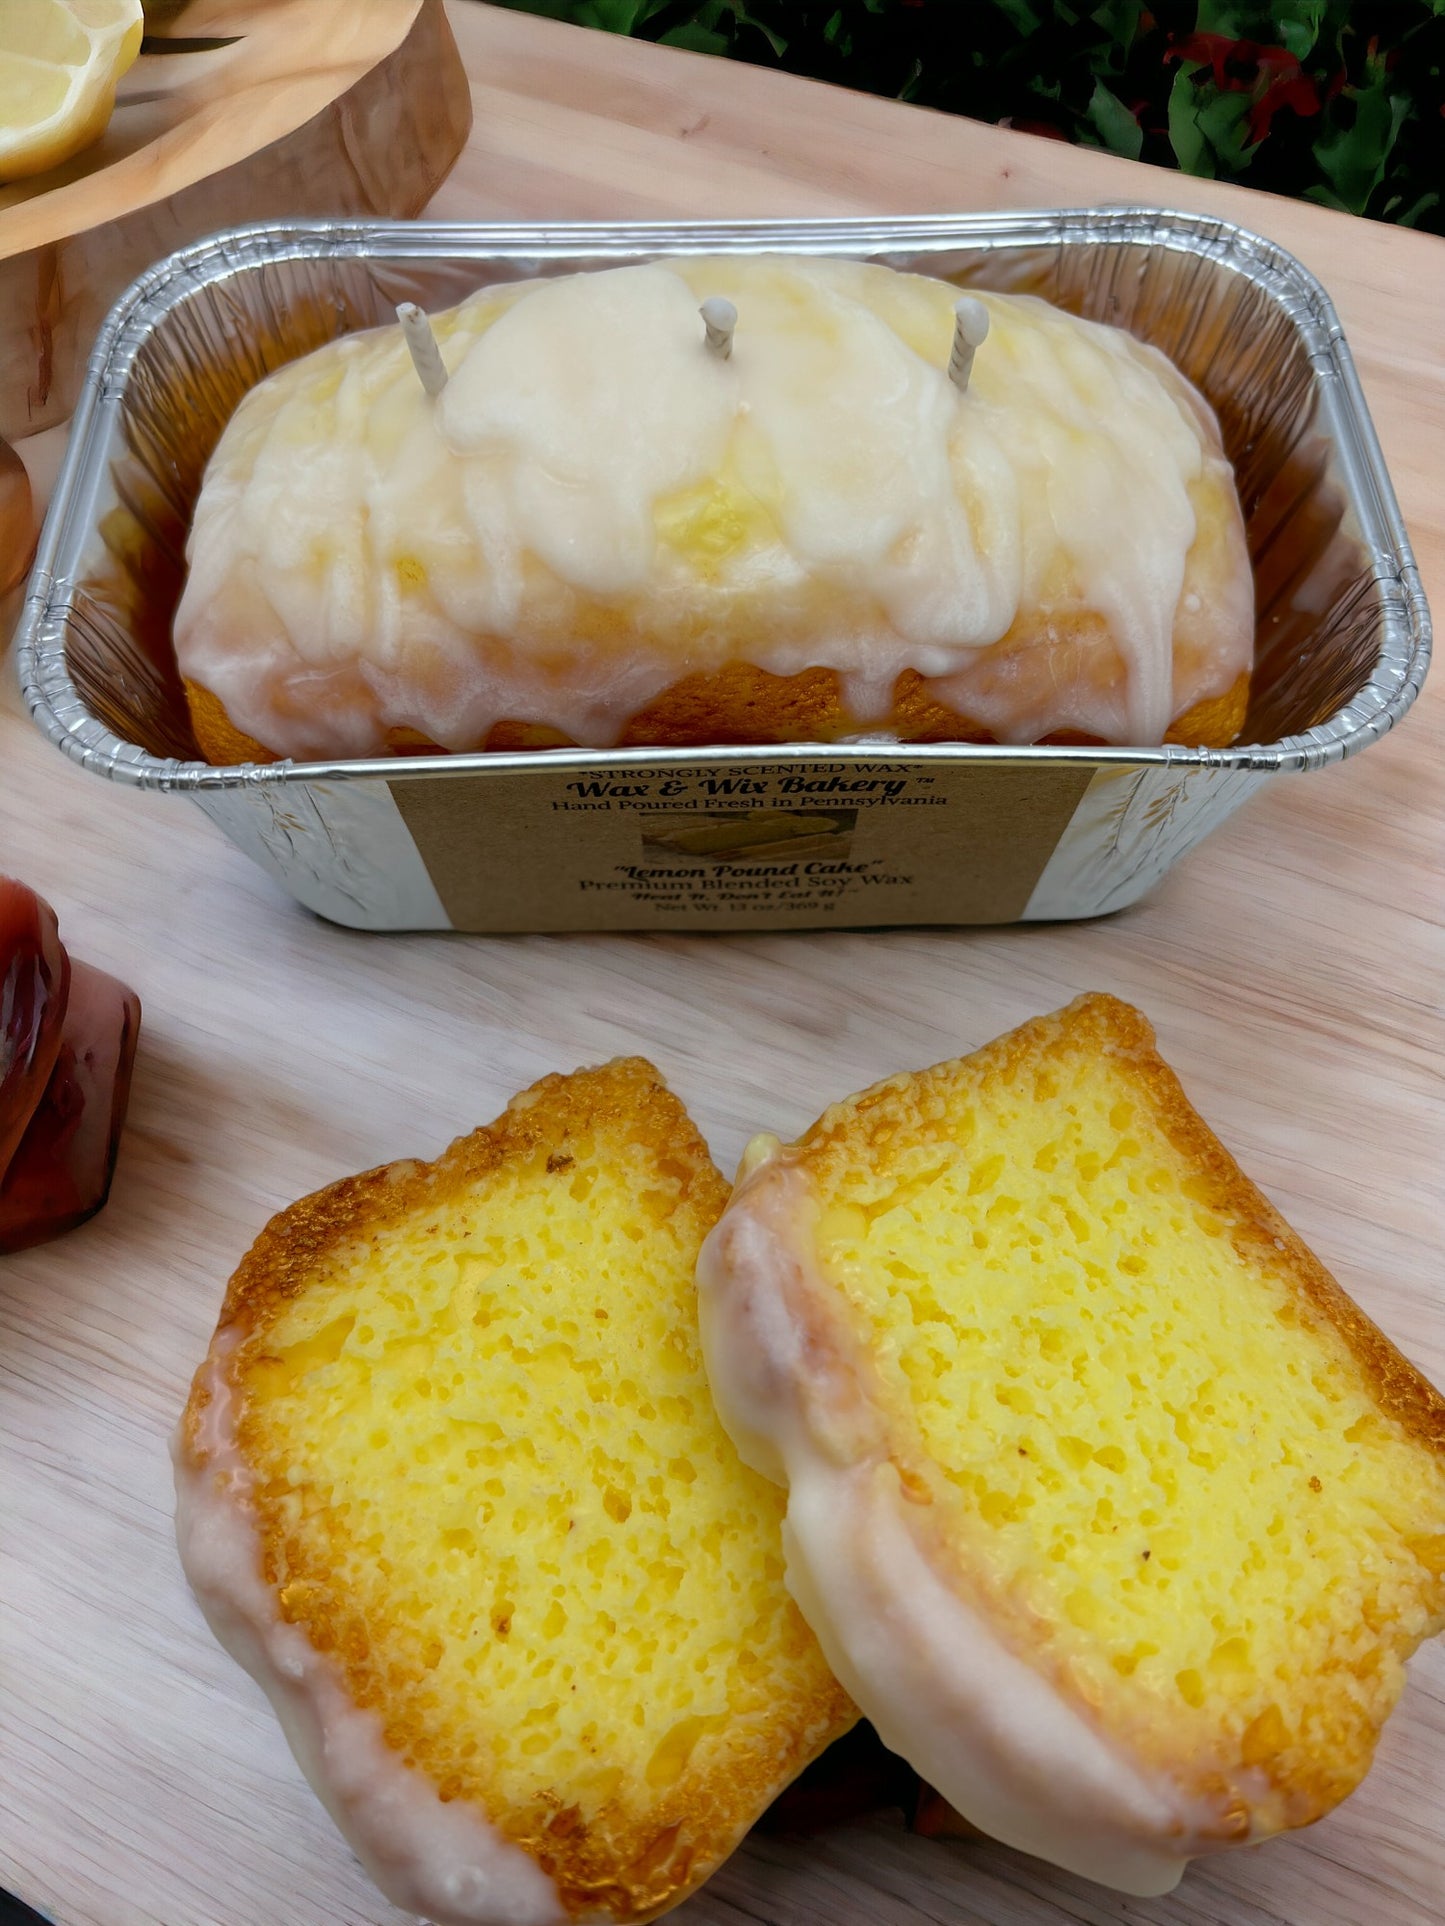 Large Glazed Lemon Pound Cake Candle. Bread Loaf Pan Candle. Soy Wax Candle. 3 Wick Candle. Strongly Scented Candle. 13 Ounce.